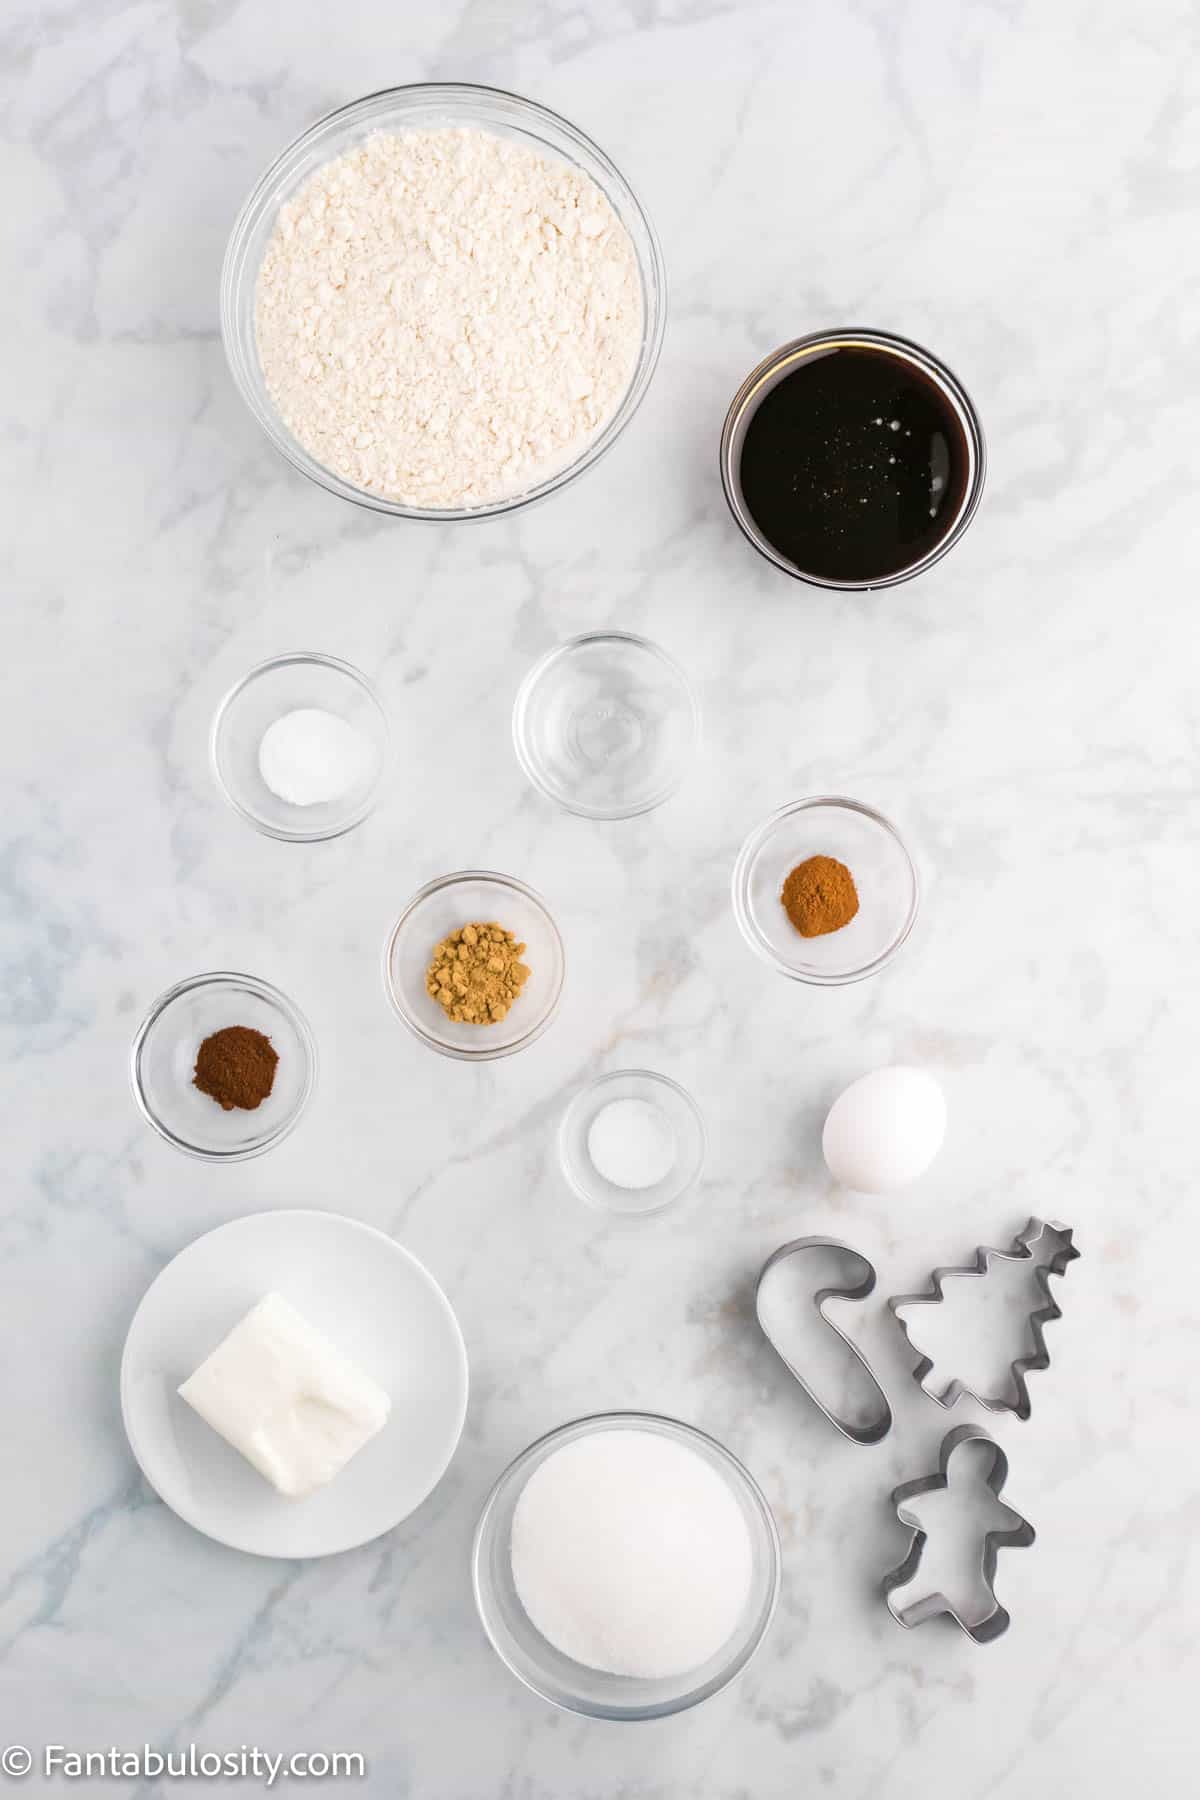 Bowls of ingredients and cookie cutters are displayed on a white marbled background